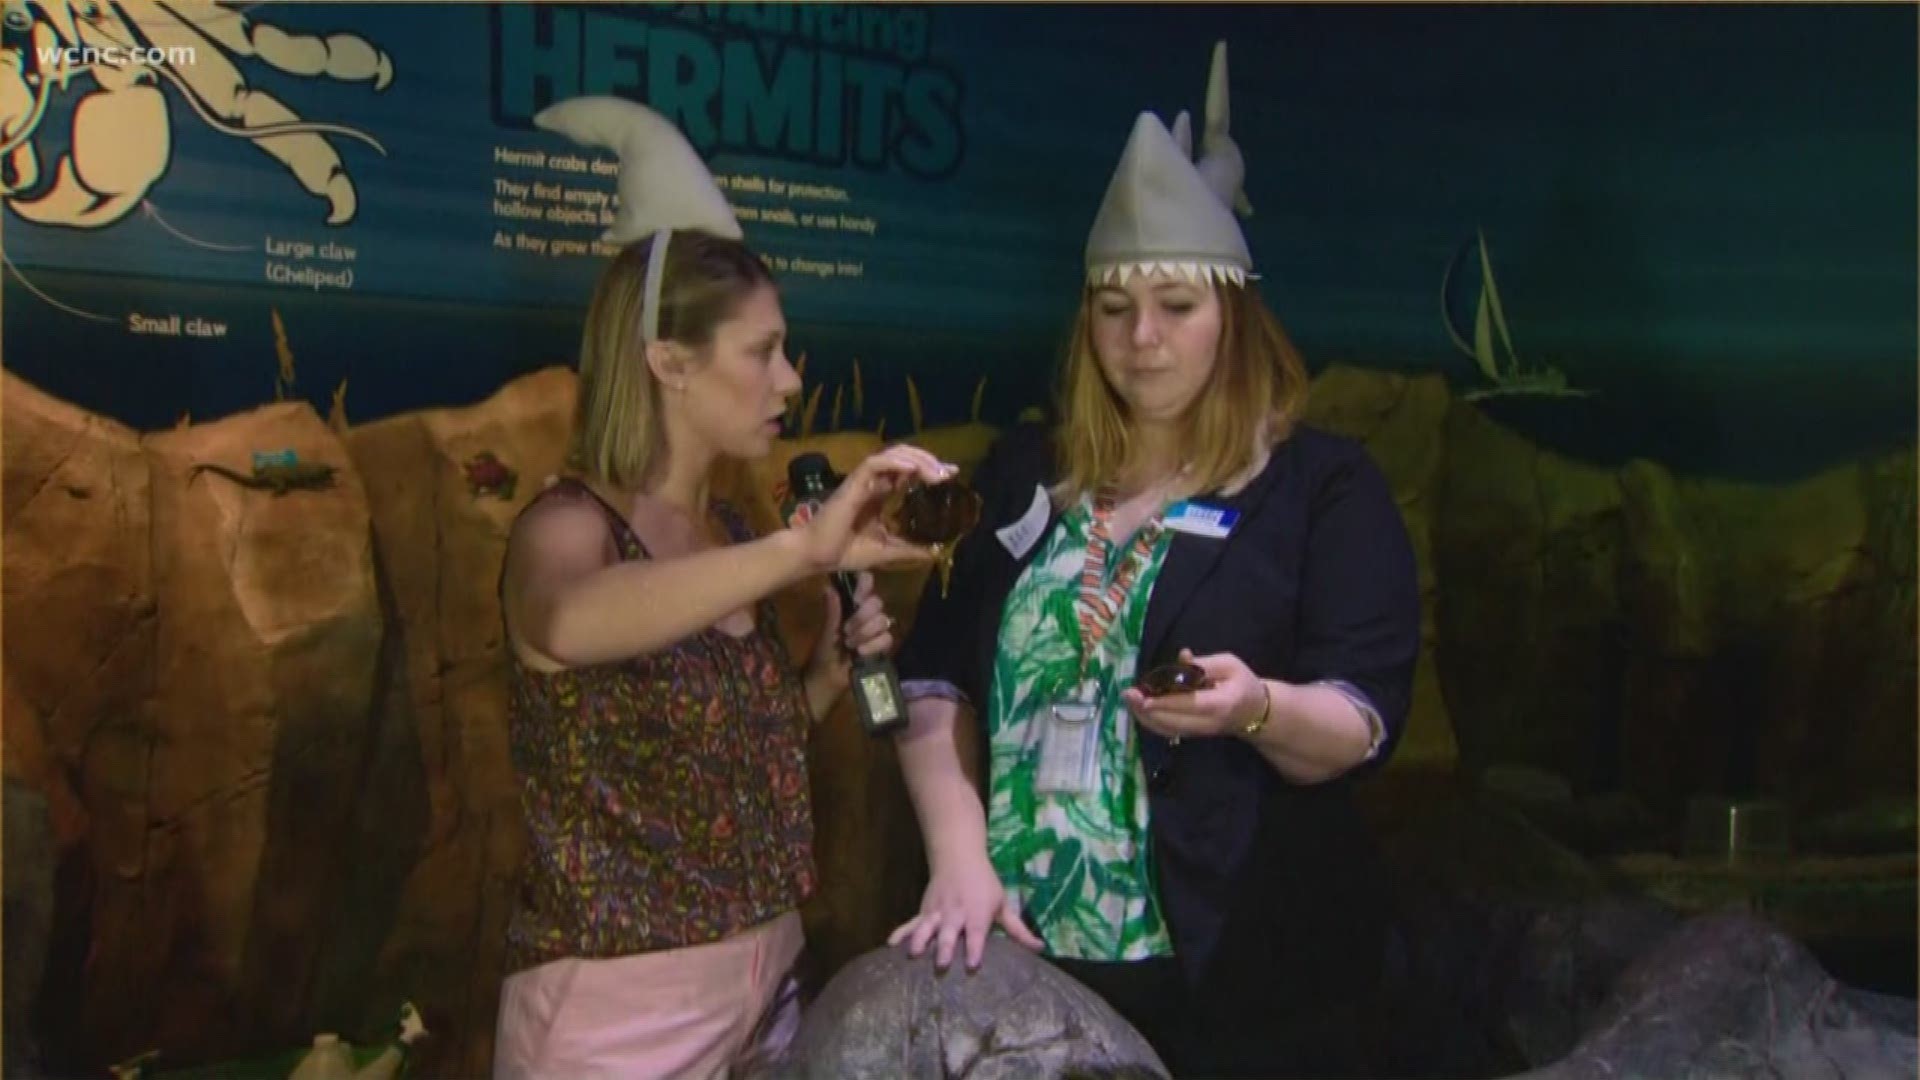 The SEA LIFE aquarium in Concord is celebrating sharks all month long in July. It's part of their "Jawsome July" promotion where you can learn about sharks and how important they are to the ecosystem.